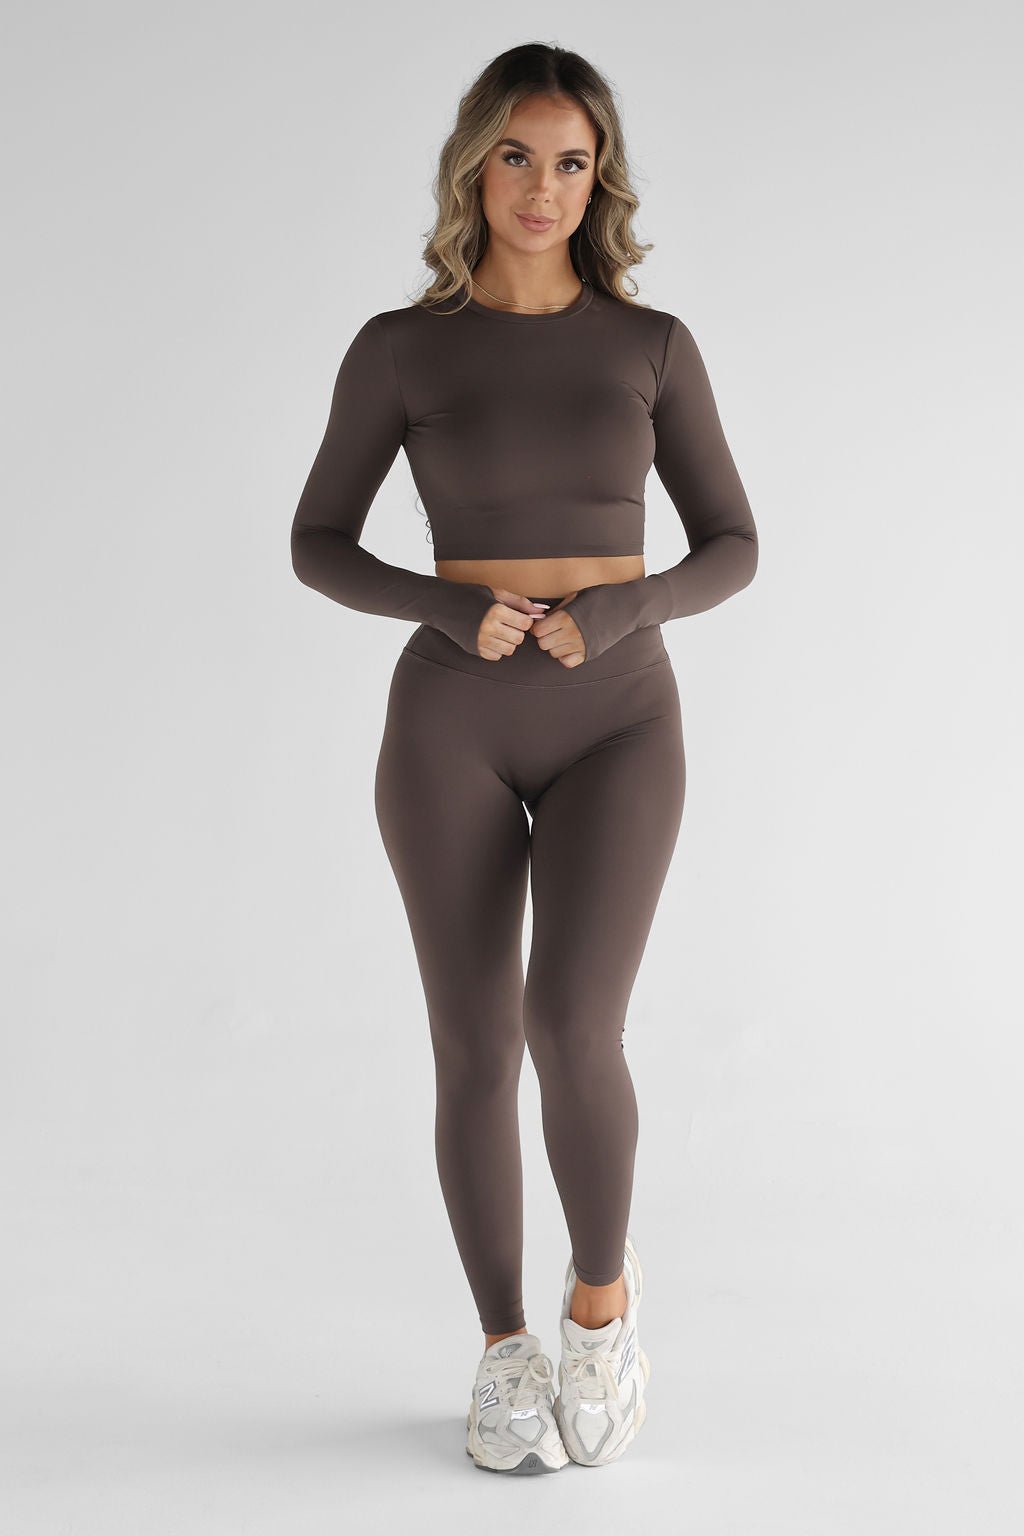 SCULPT Long Sleeve Crop - Dark Chocolate SHIPPING FROM 23/08 - 25/08 - LEELO ACTIVE